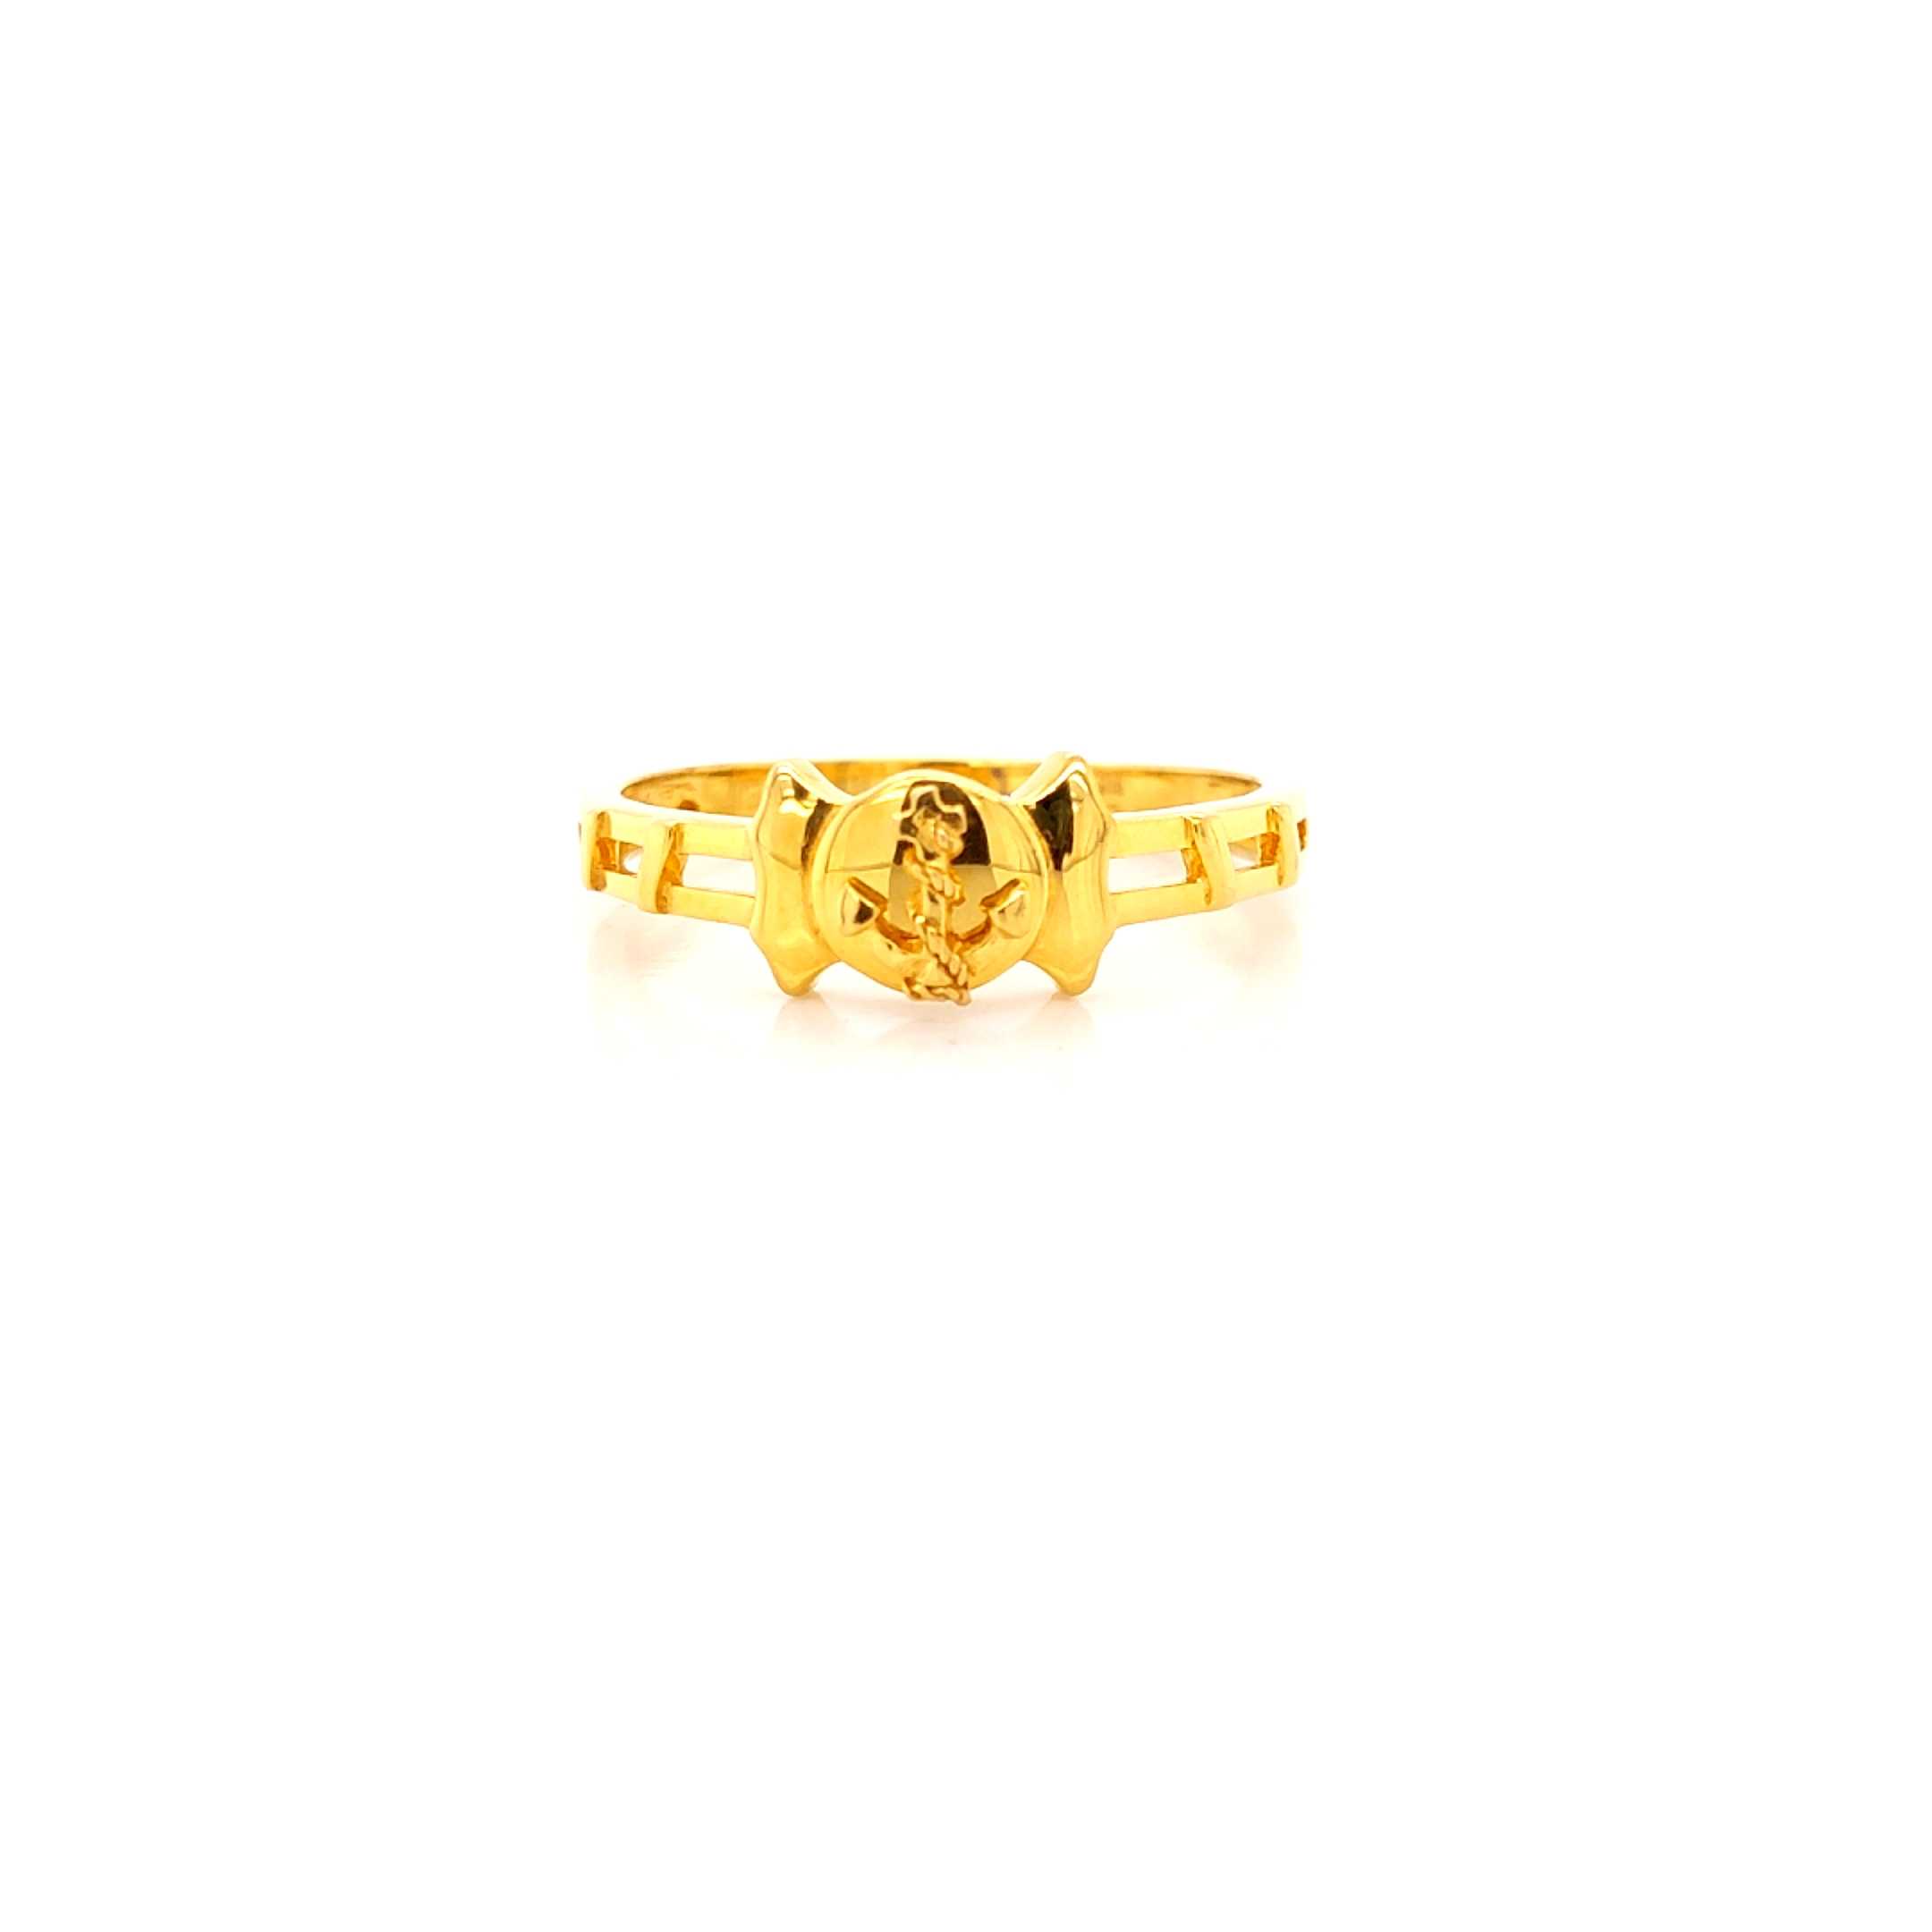 Exciting Lord Ganesh Gold Casting Ring